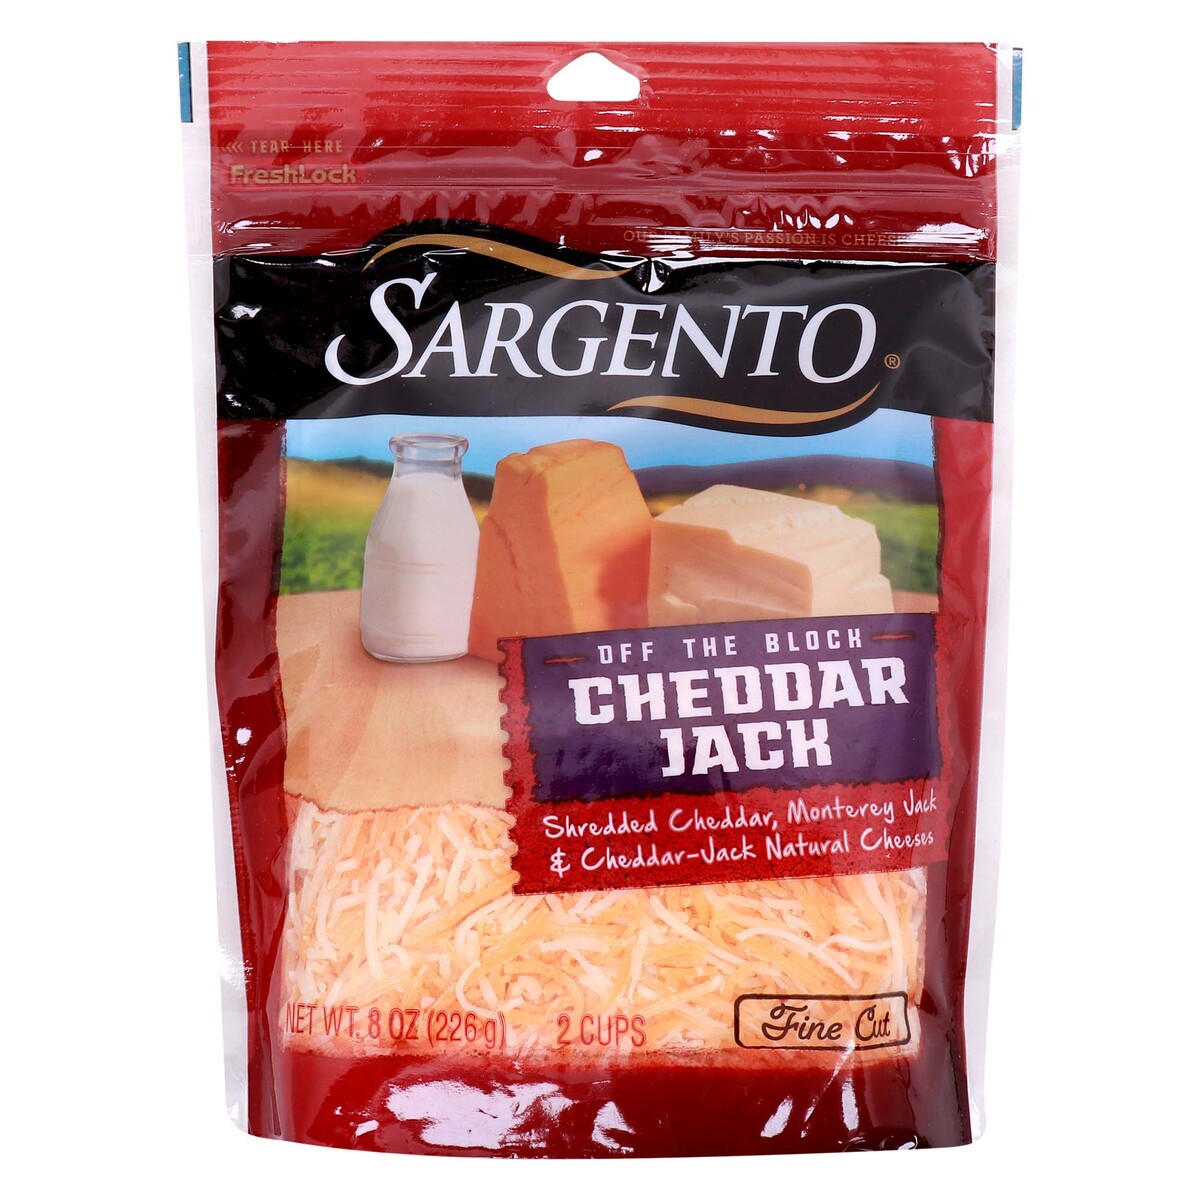 Buy Sargento Off the Block Cheddar Jack Grated Cheese, 8 oz (226 g) Online at Best Price | Products from USA | Lulu UAE in UAE